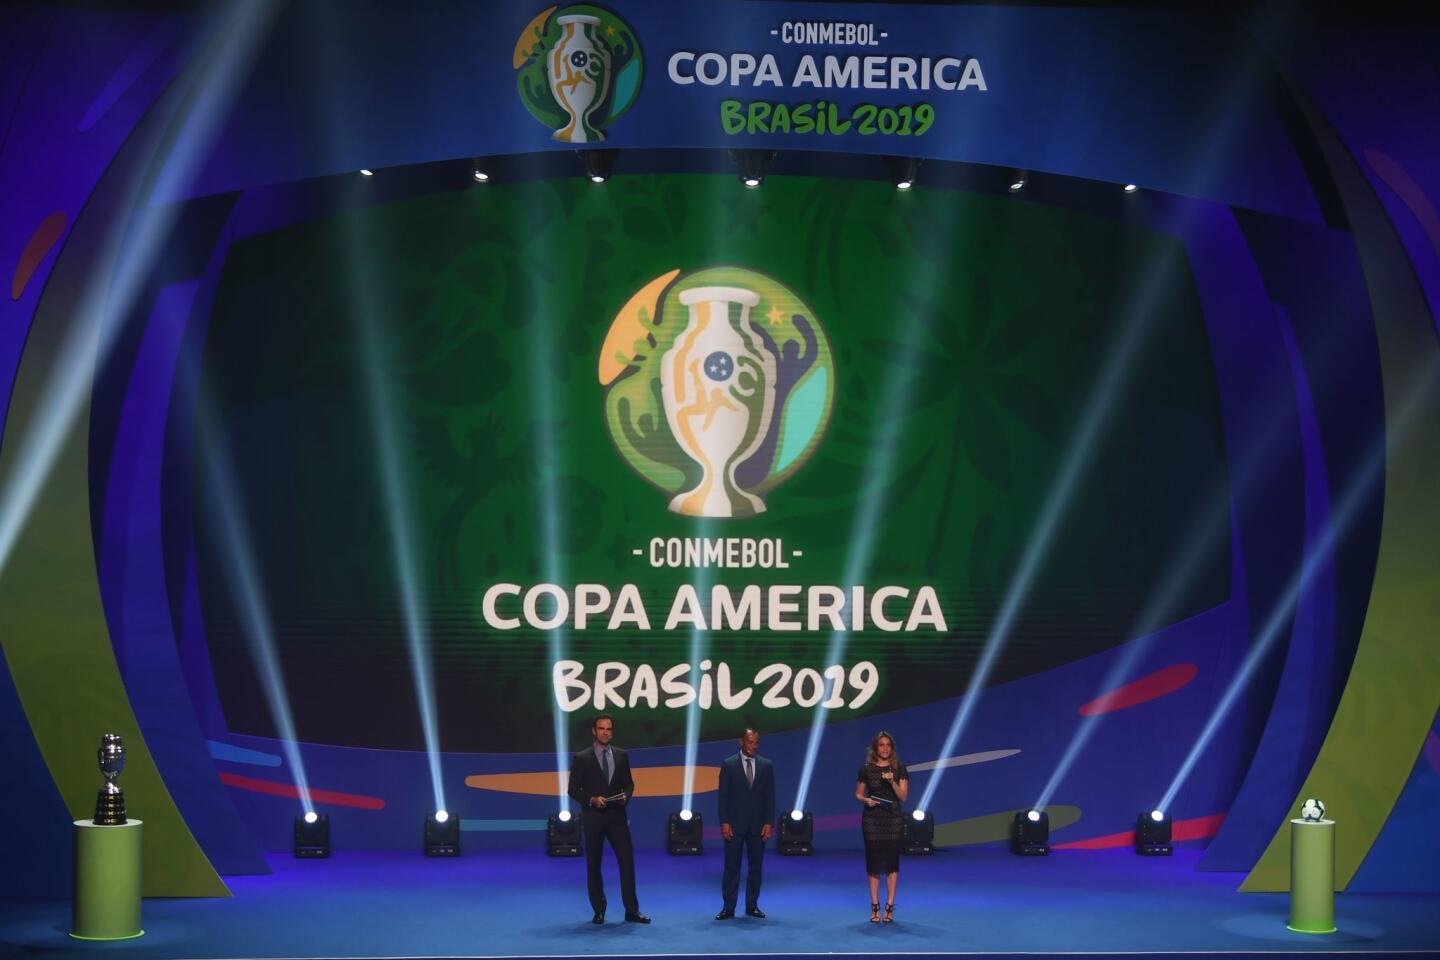 TV presenters Tadeu Schmidt (L) and Fernanda Gentili (R) and Brazilian former footballer Cafu present the draw of the 2019 Copa America football tournament, in Rio de Janeiro, Brazil, on January 24, 2019. - The 2019 Copa America will be held in Brazil between June 14 and July 7.